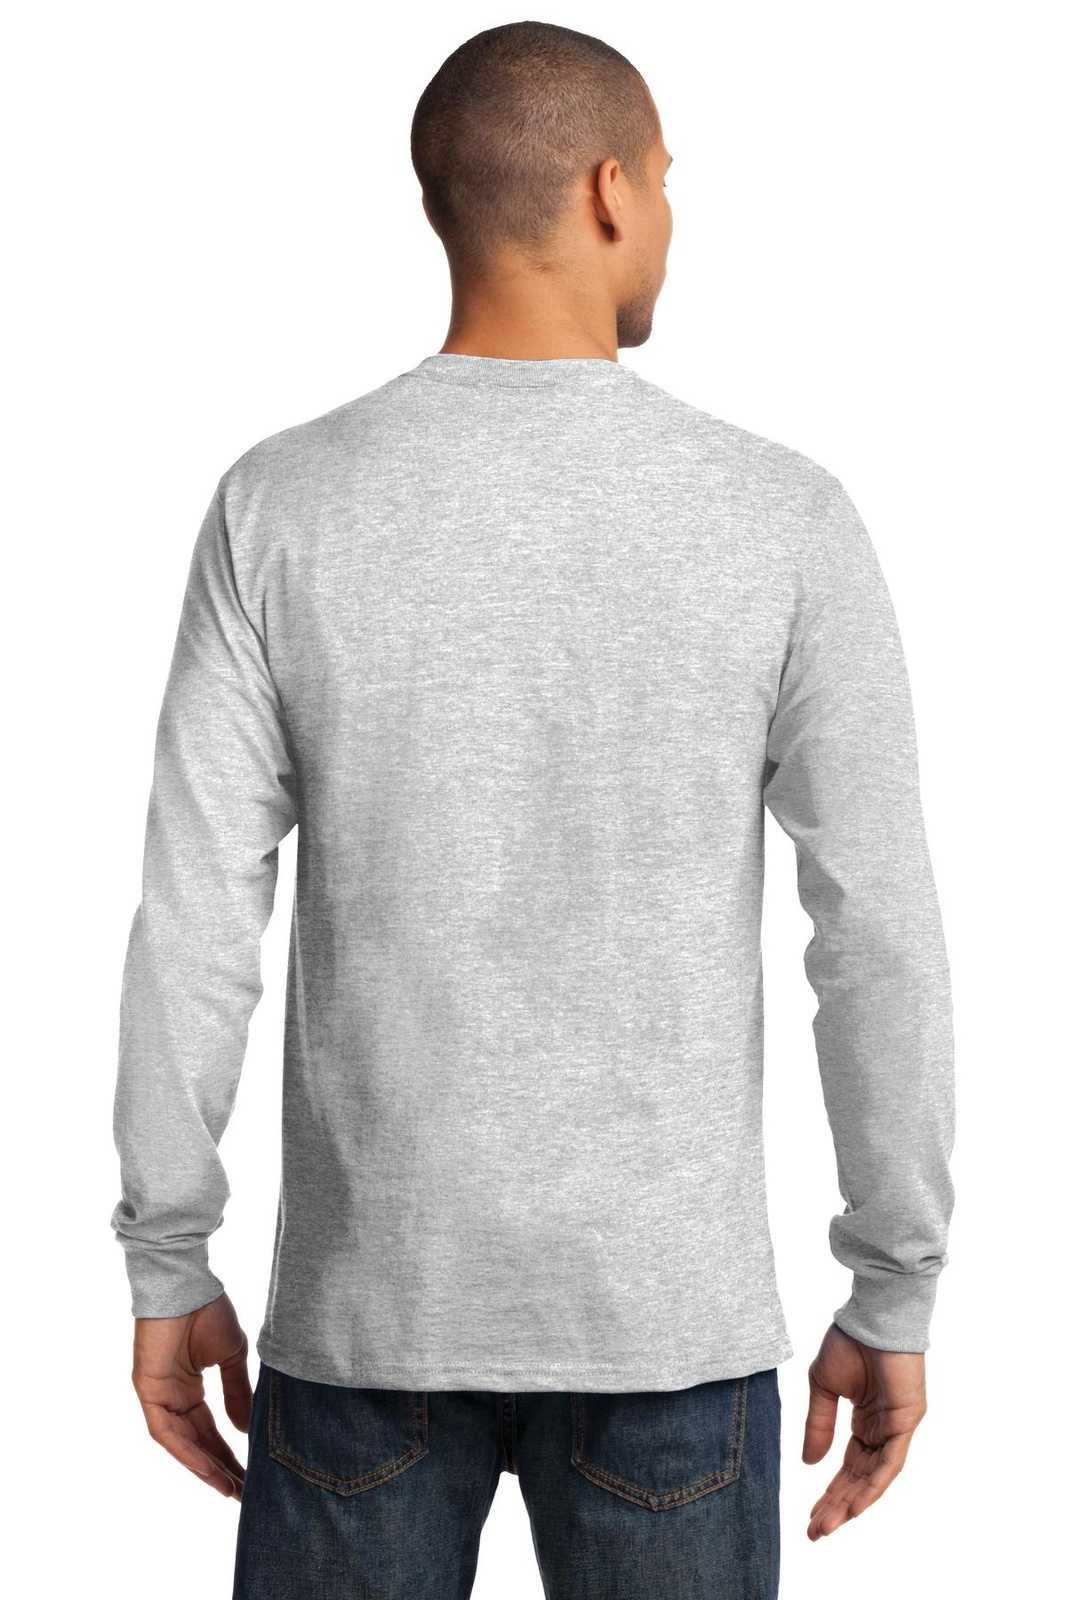 Port & Company PC61LST Tall Long Sleeve Essential Tee - Ash - HIT a Double - 1